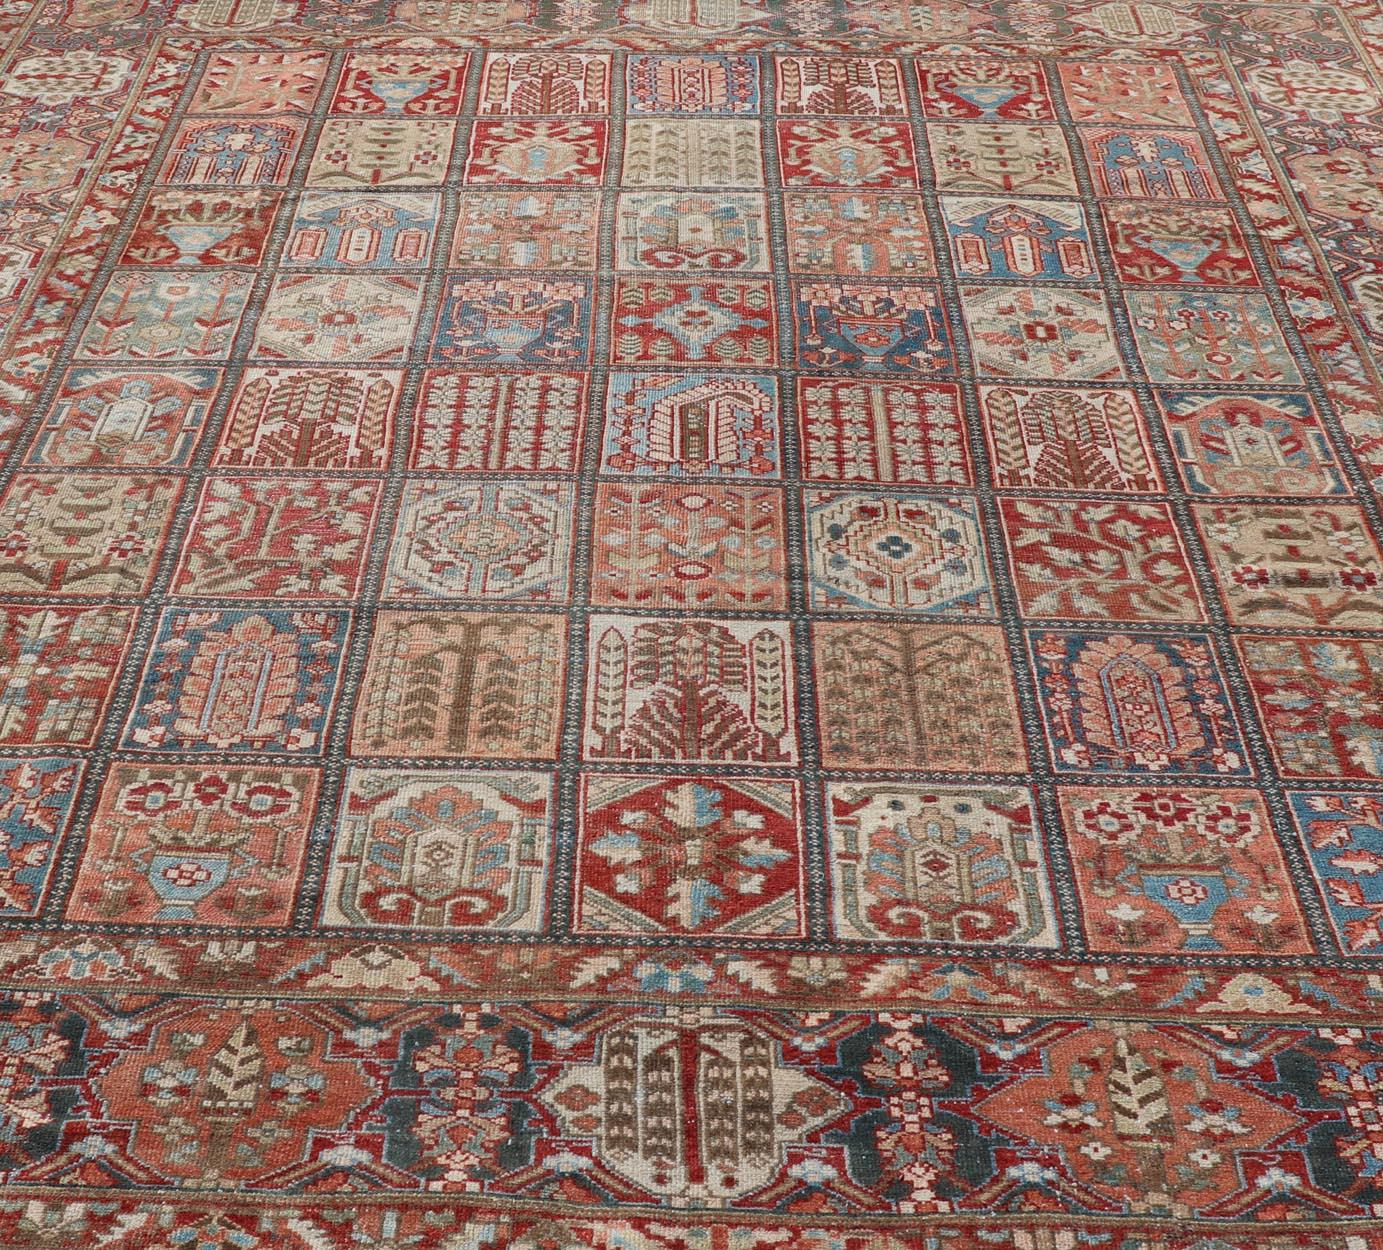 20th Century Square Persian Large Bakhtiari Rug with All-Over Garden Design in Muted Colors For Sale